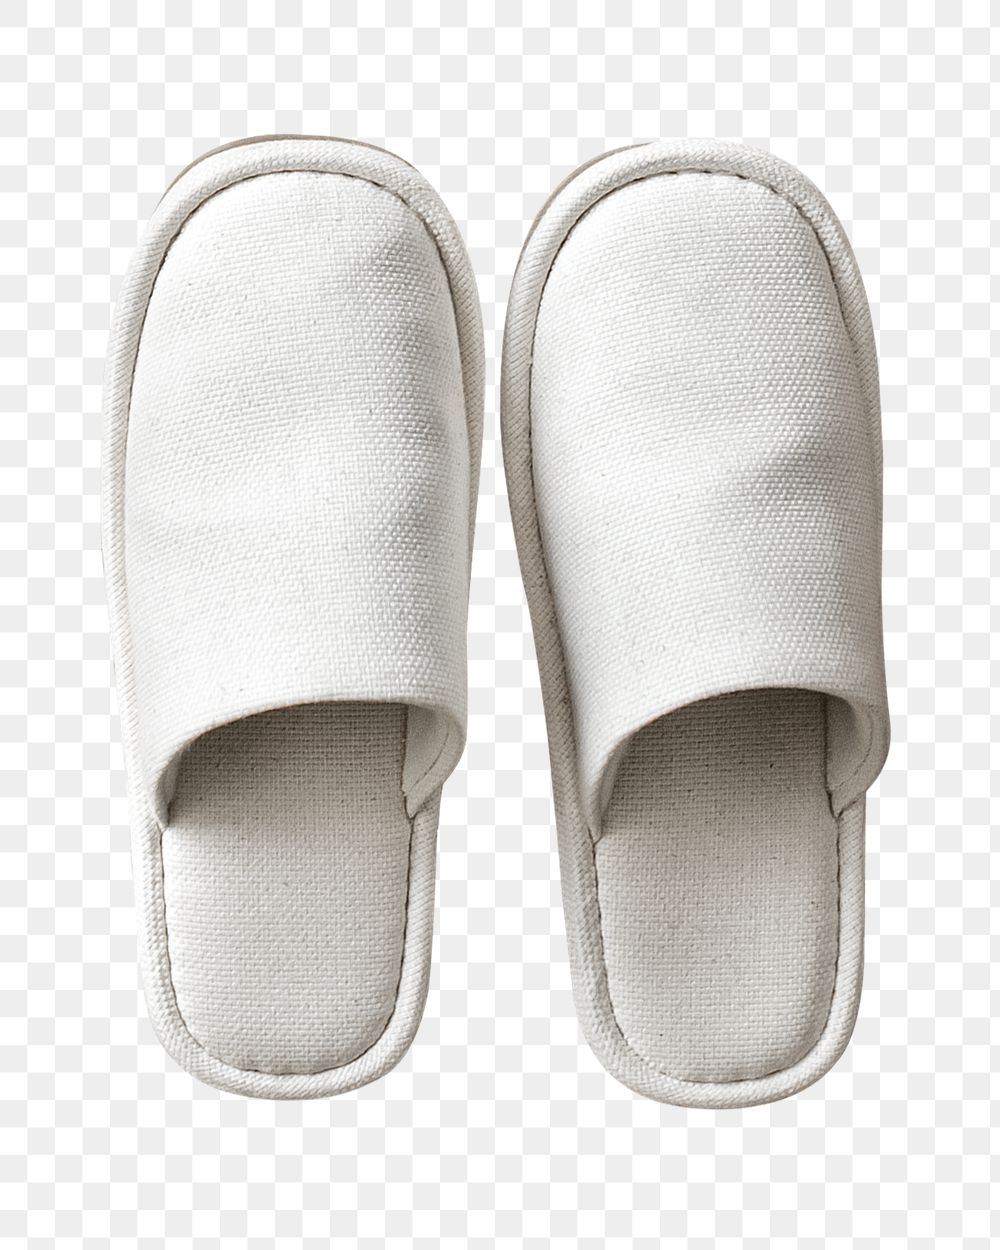 White slippers  png sticker, transparent background